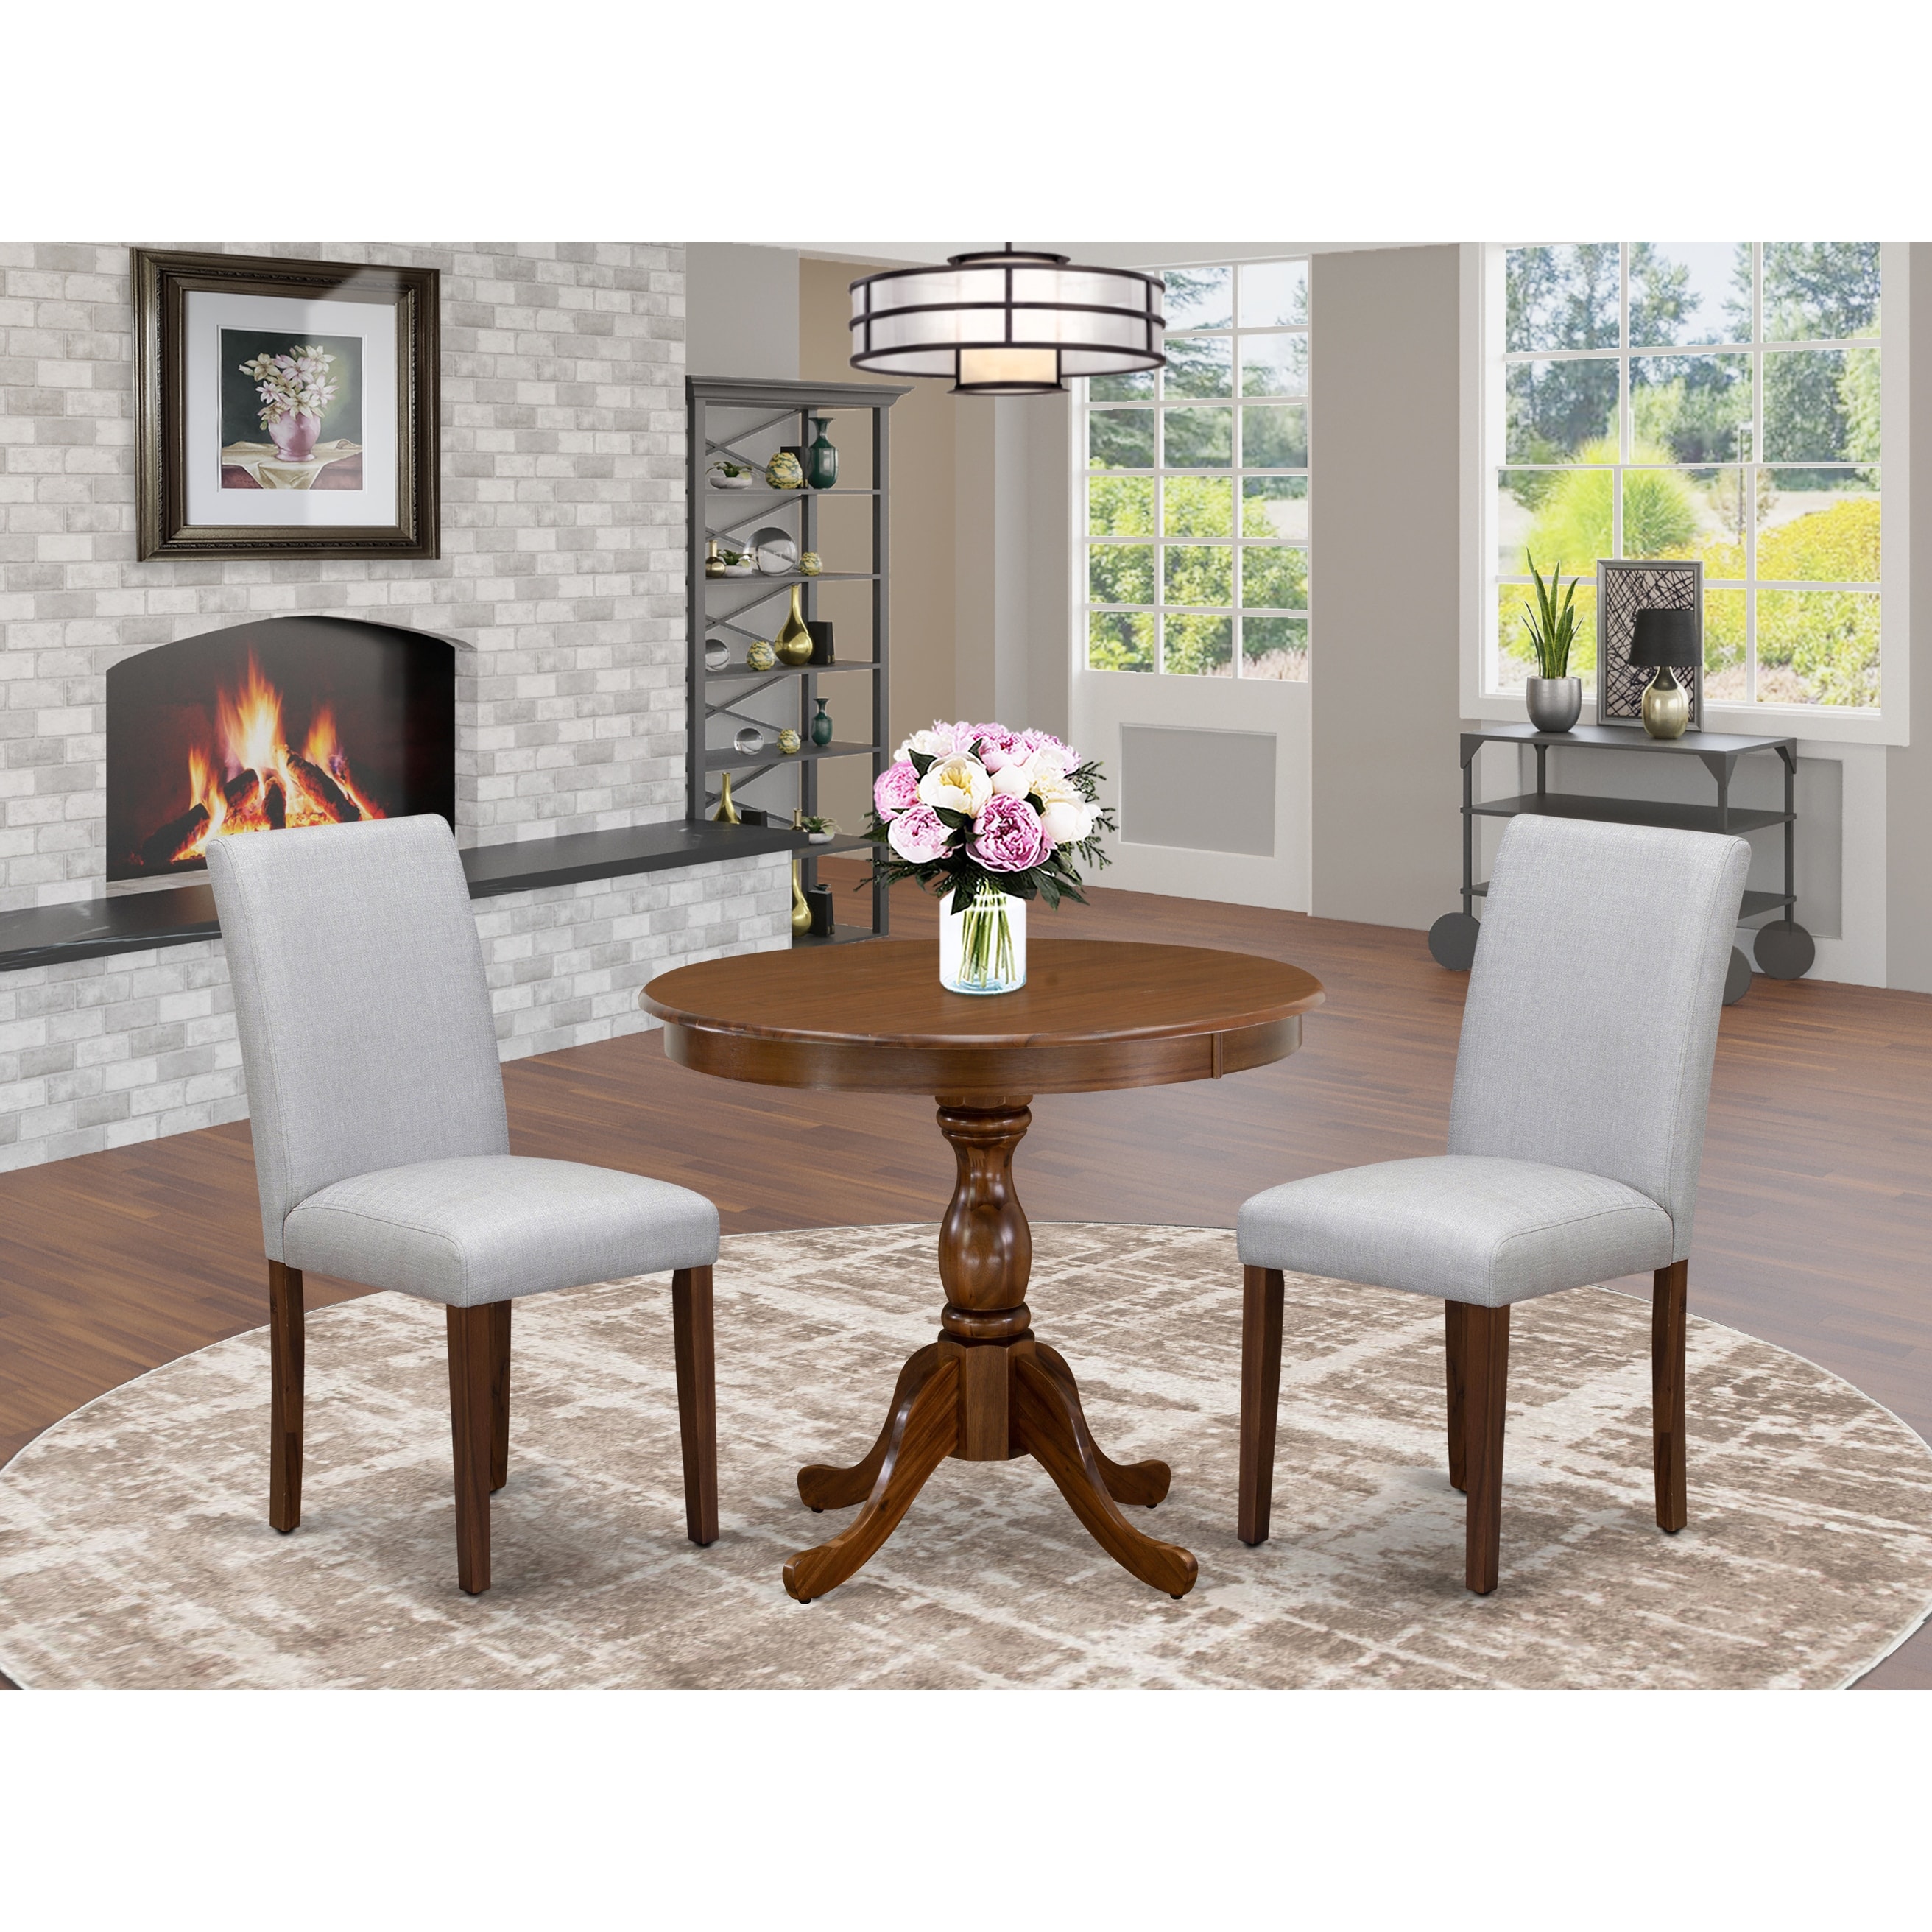 East West Furniture Kitchen Table Set Contains A Round Dining Room Table And Upholstered Chairs (finish and Upholstered Options)